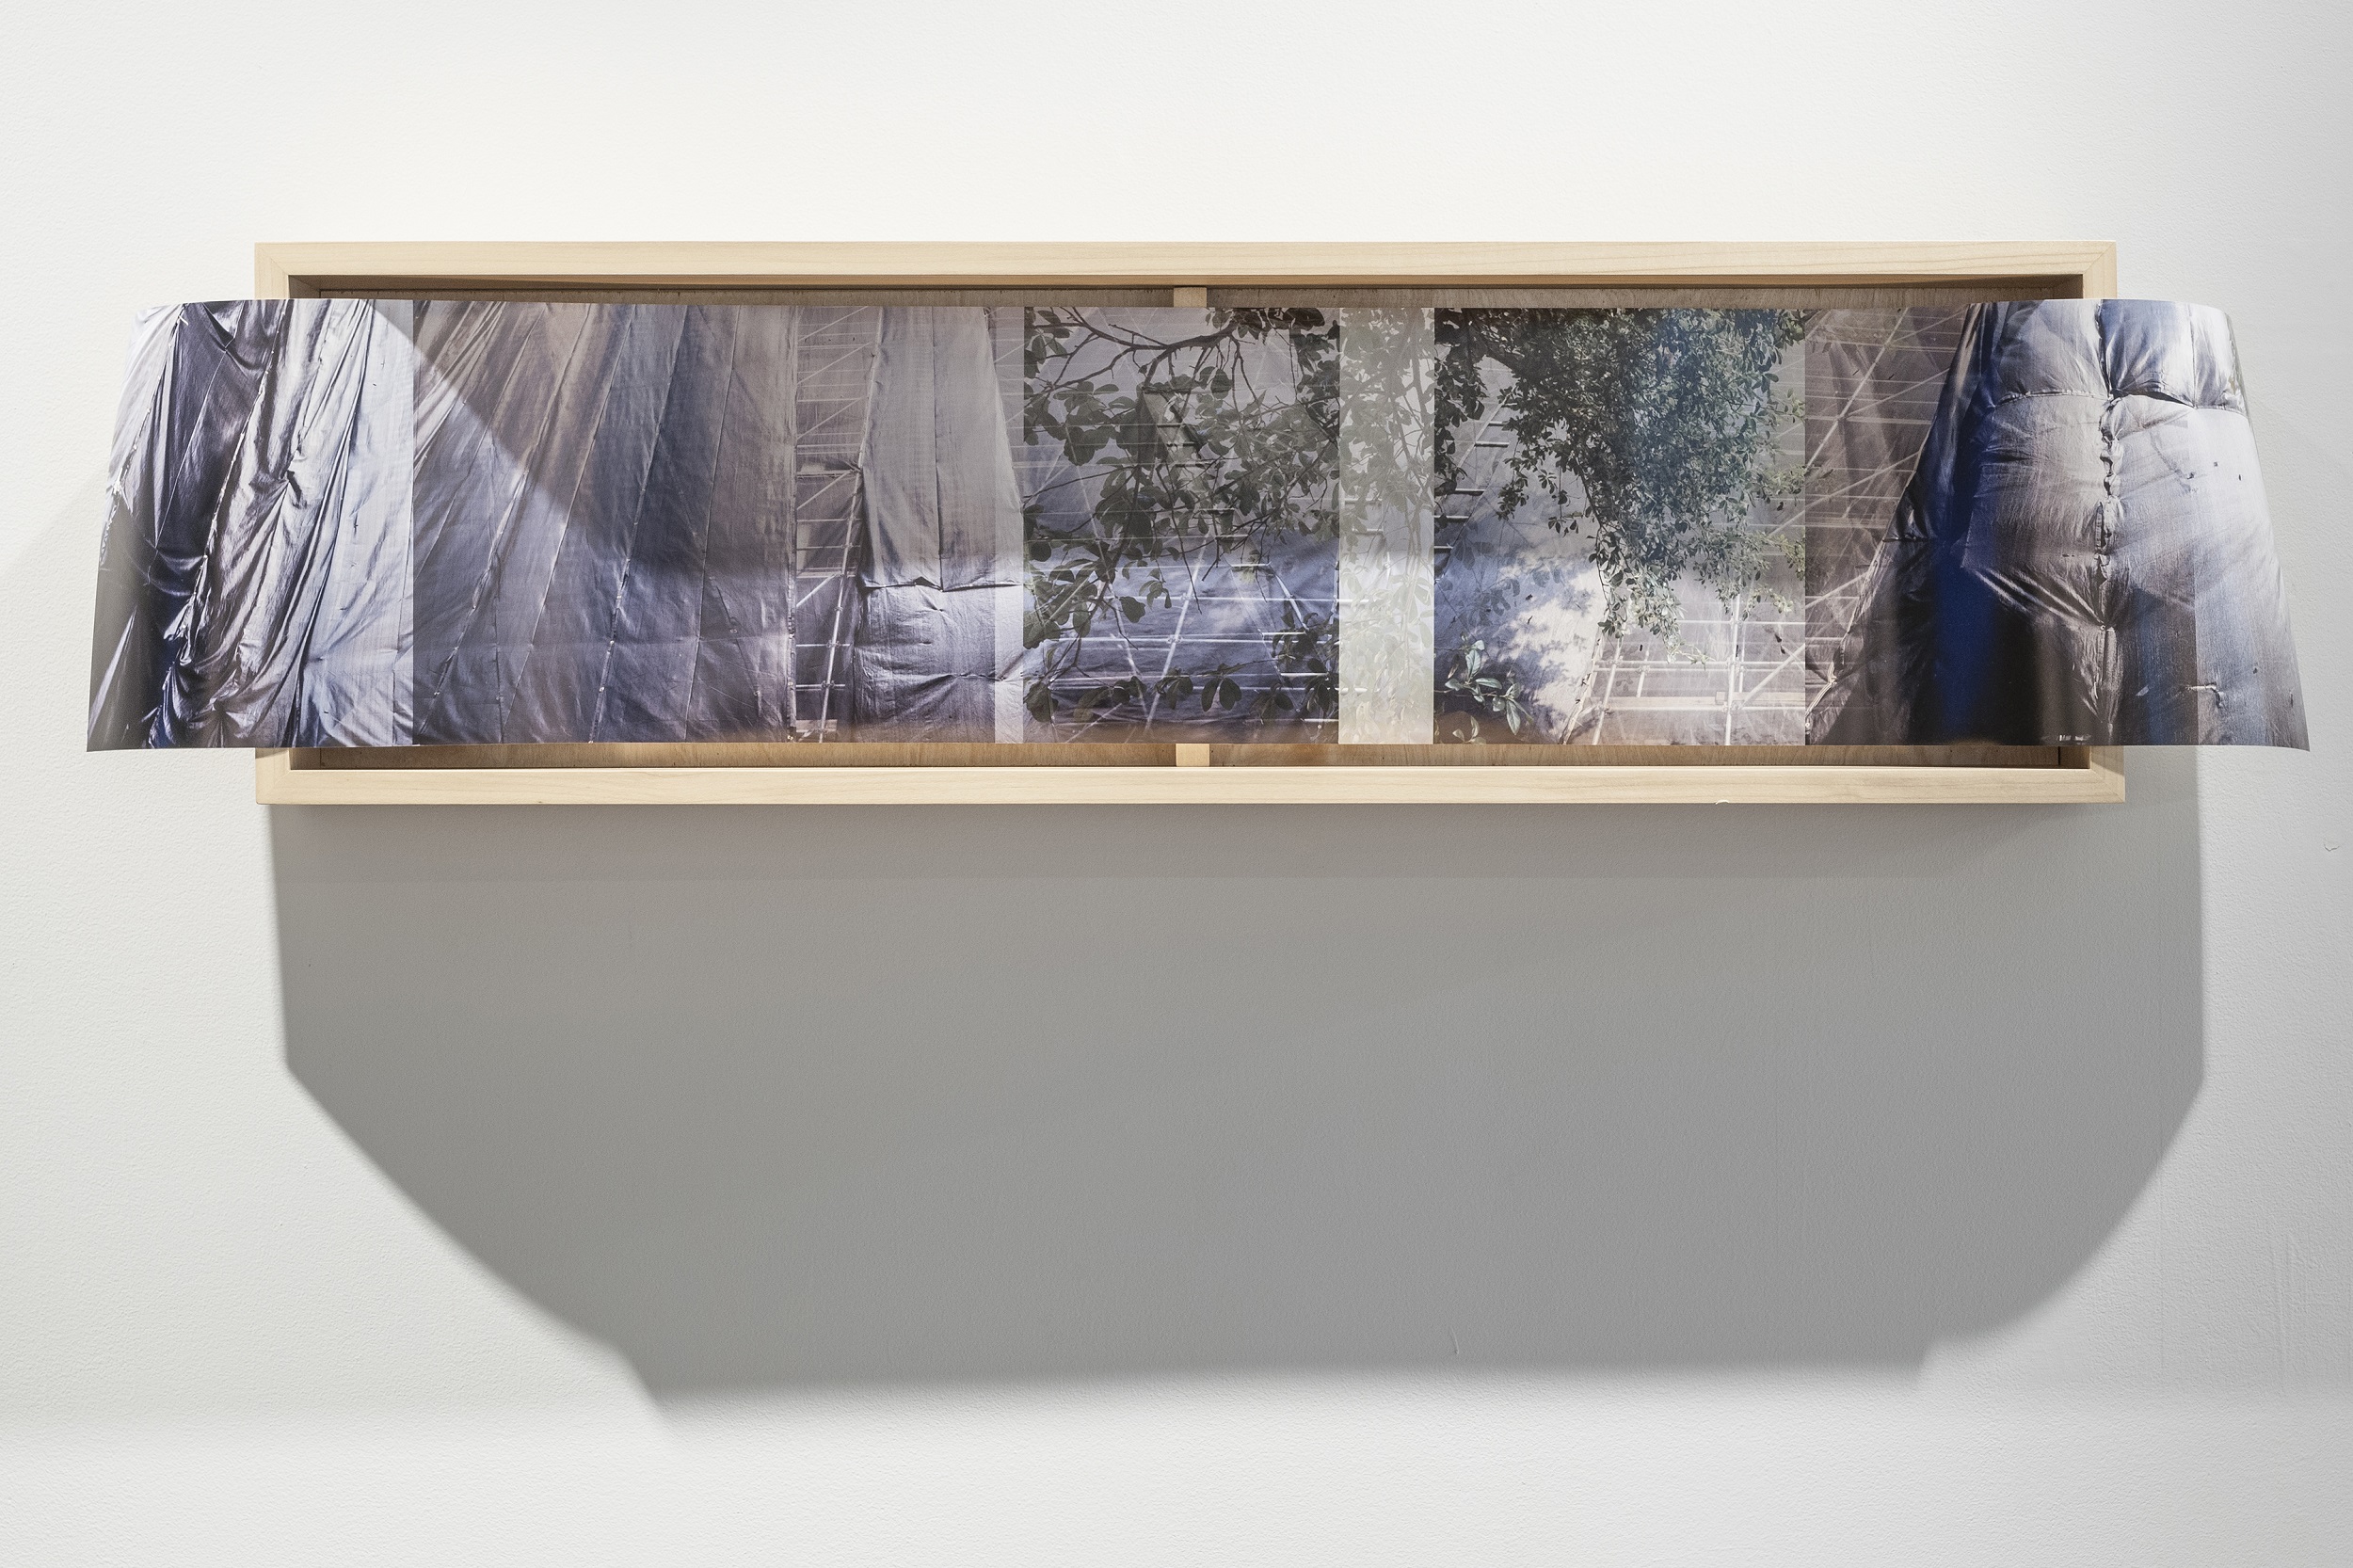 Photograph of artwork, composed of a digital print extending the borders of its unfinished wood frame, hung on a gallery wall